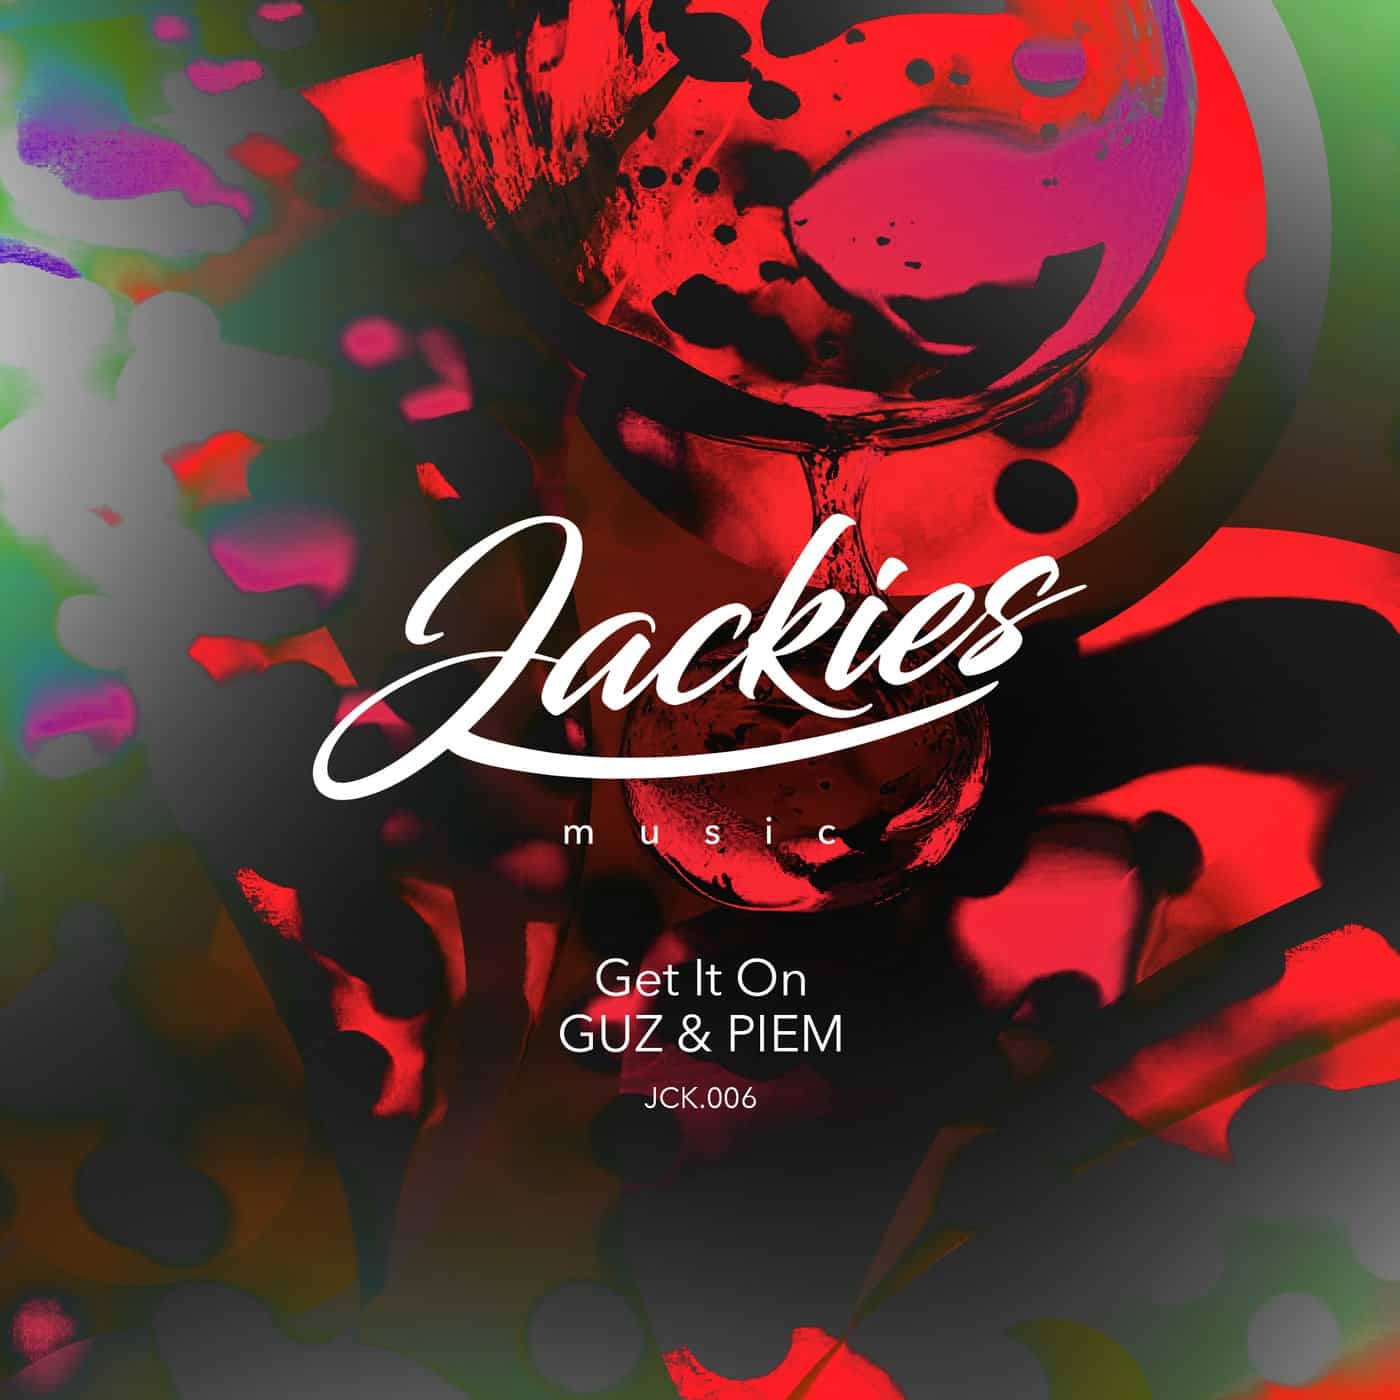 image cover: Piem, GUZ (NL) - Get It On on Jackies Music Records